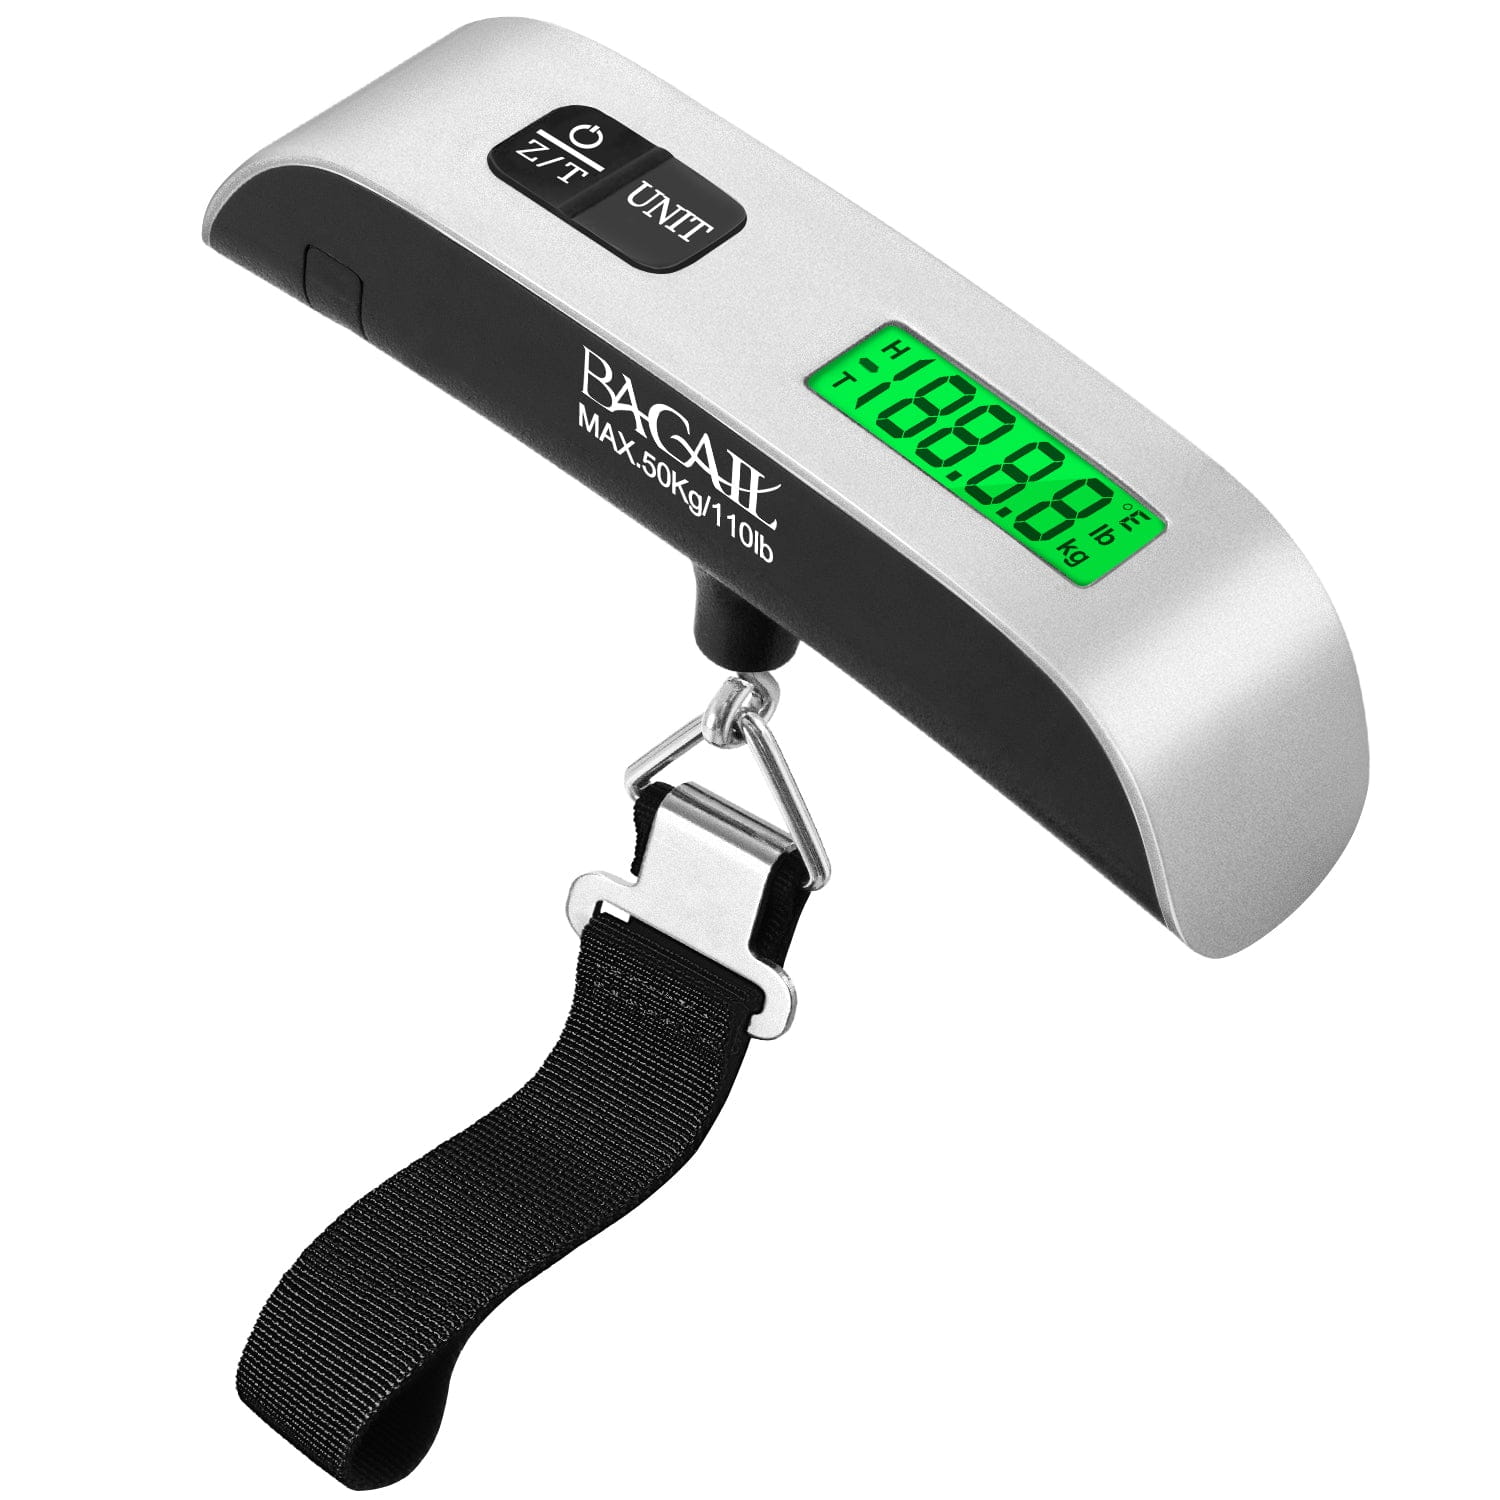 http://www.bagail.com/cdn/shop/files/bagail-digital-luggage-scale-hanging-baggage-scale-with-backlit-lcd-display-travel-weight-scale-portable-suitcase-weighing-scale-with-hook-110-lb-capacity-battery-included-silver-with_a6503bea-1acd-465f-b320-0813eebcb36d.jpg?v=1686554525